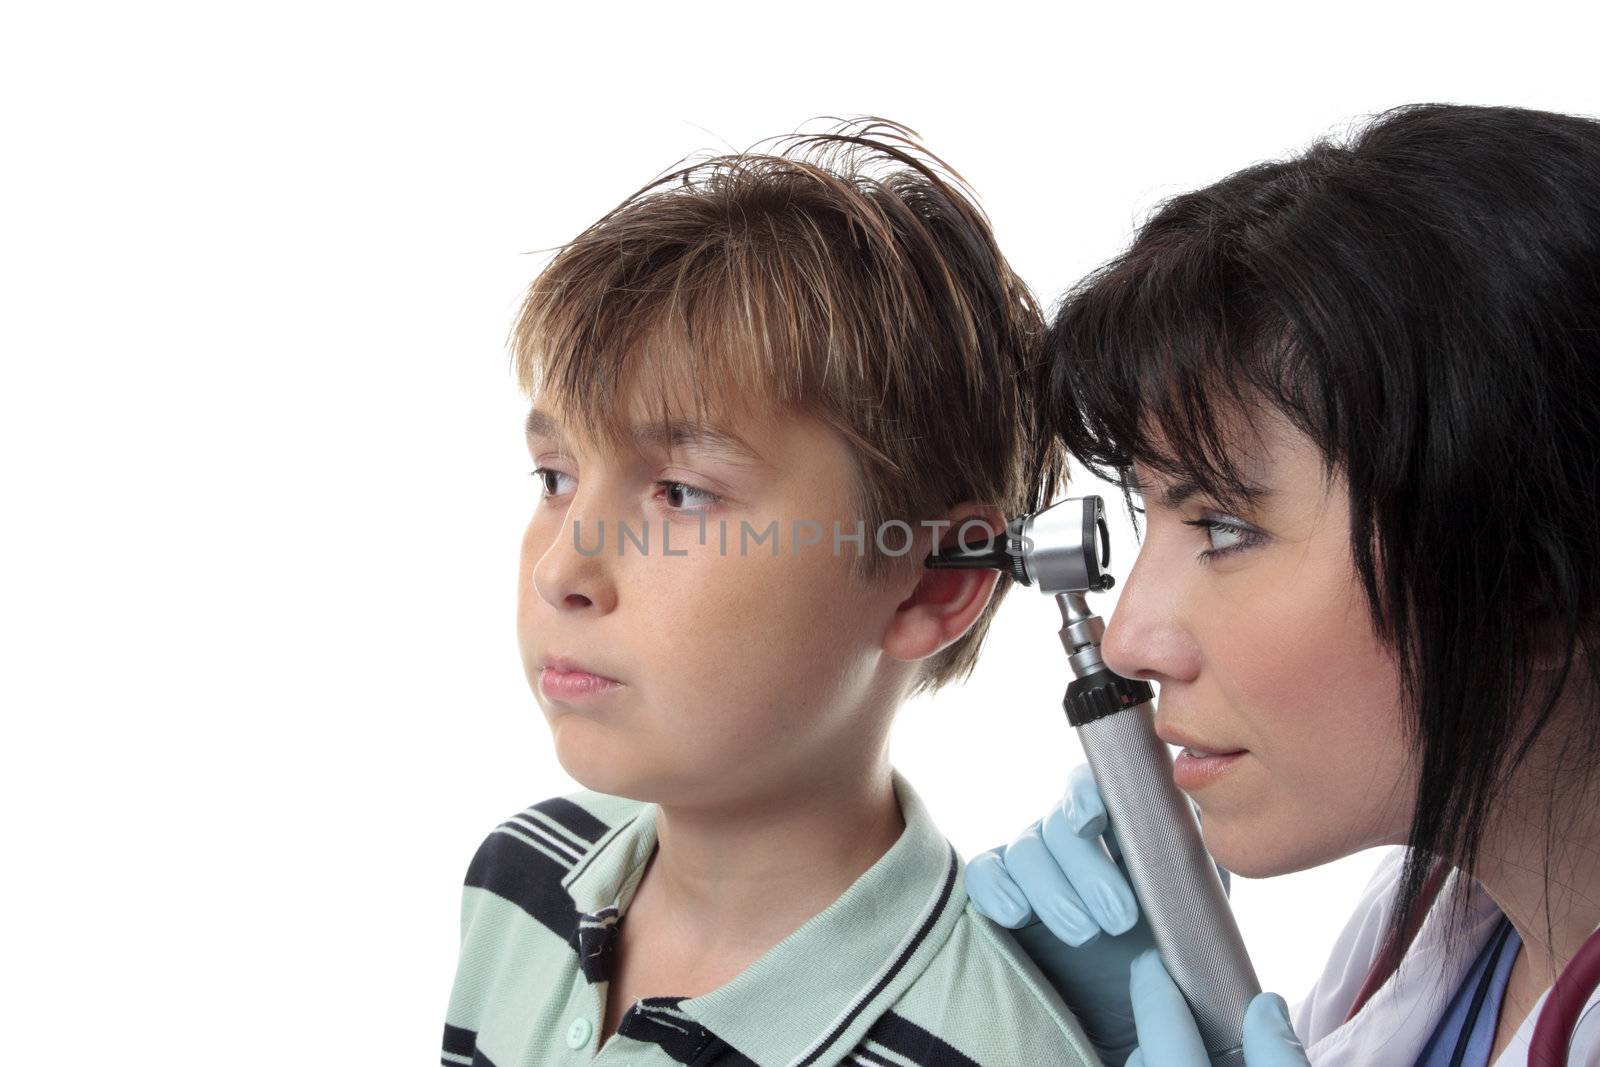 A doctor or pediatrician checks a childs ears.